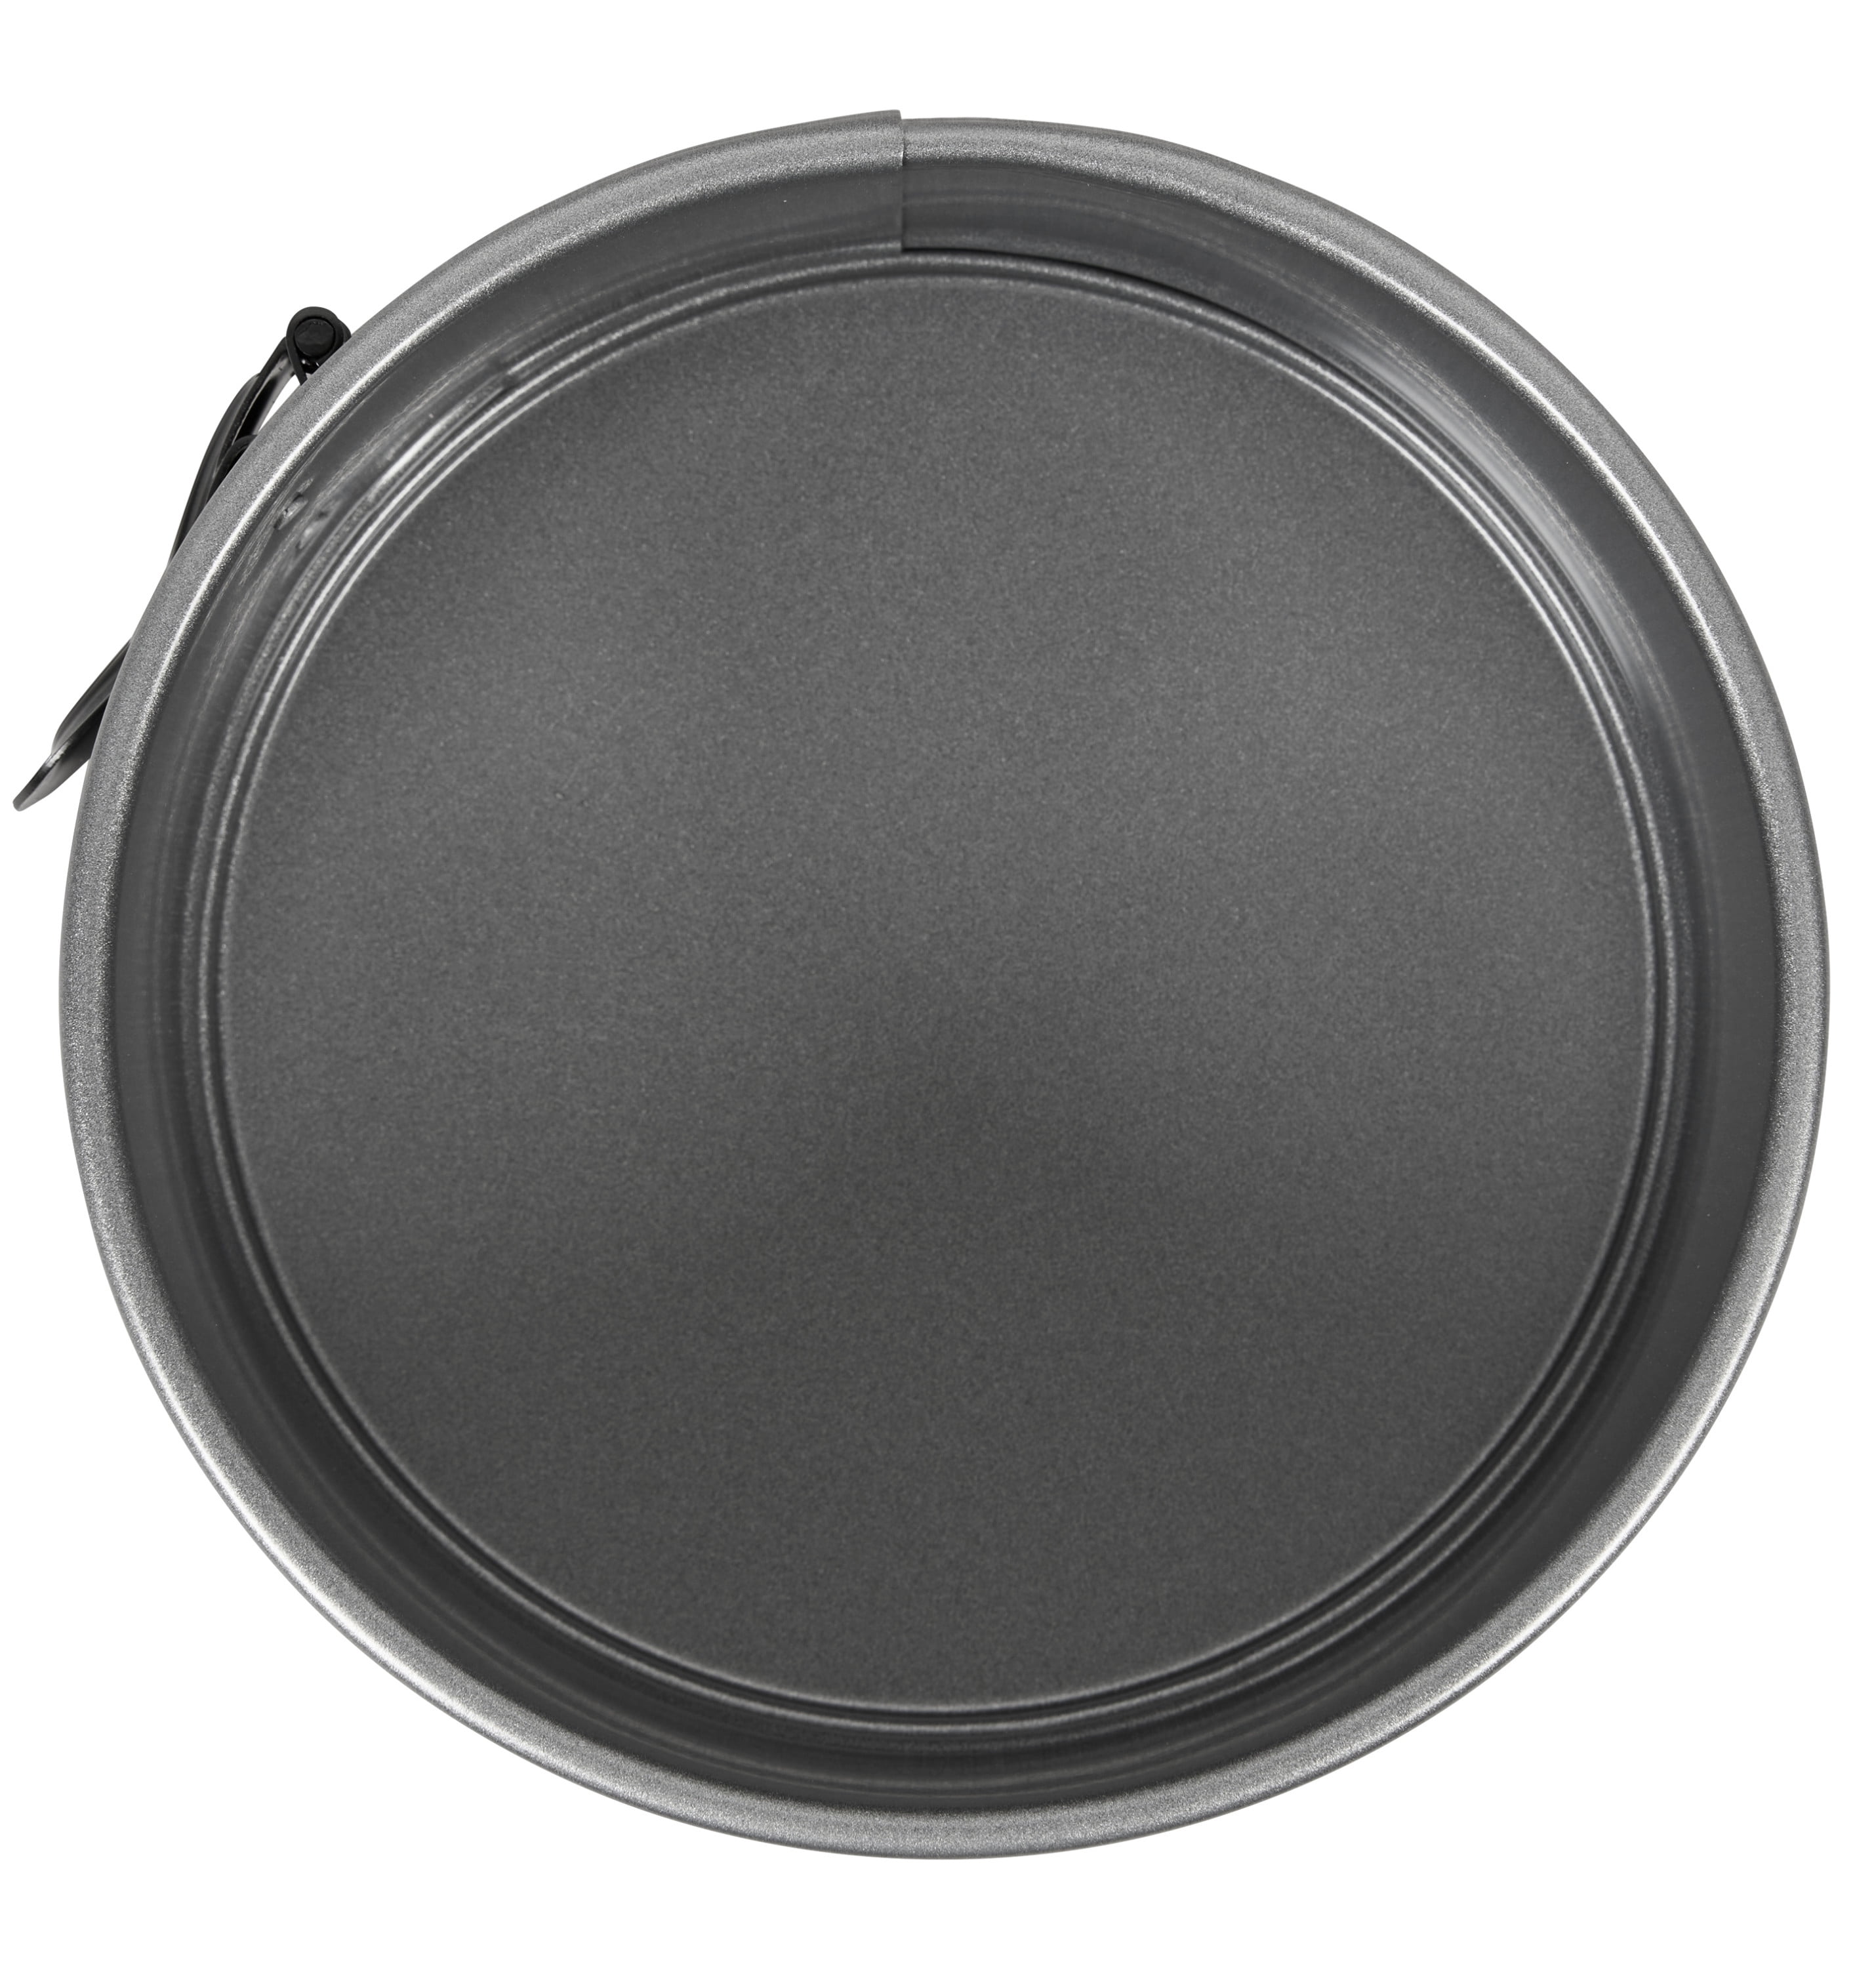  Wilton Deep Dish Pizza and Cheesecake Springform Pan, 12-Inch:  Home & Kitchen